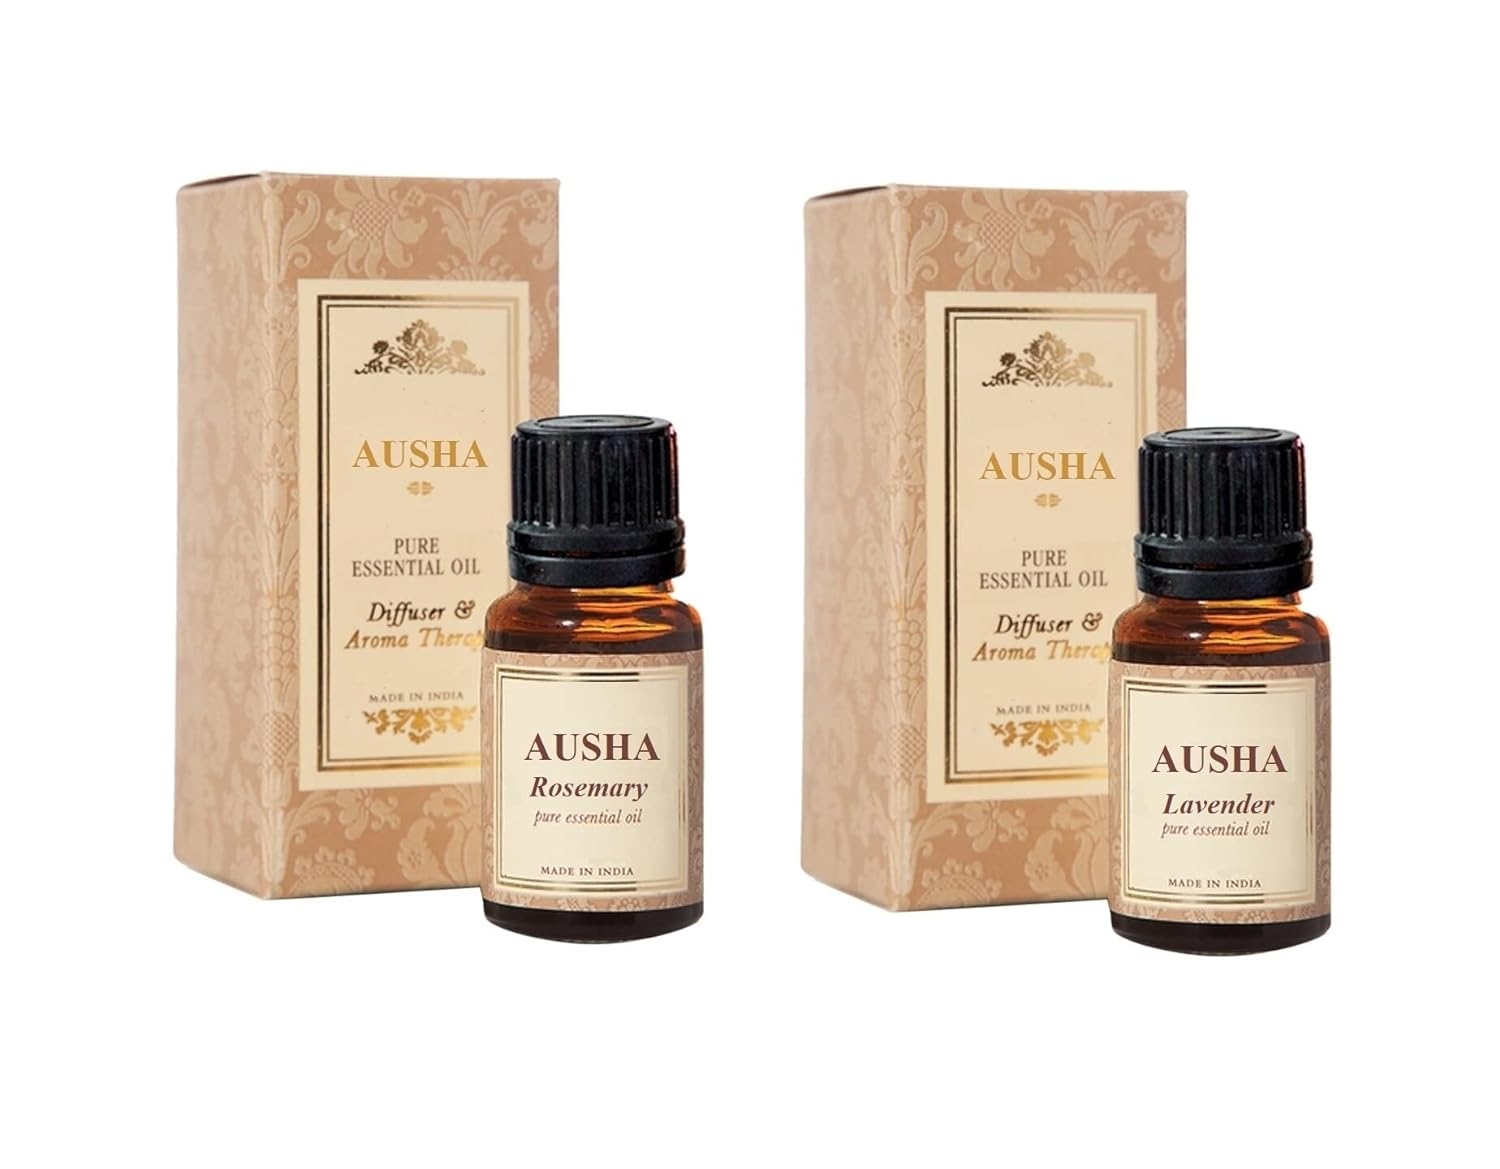 AUSHA® Essential Oil Ylang Ylang & Oud| 100% Pure and Natural | For Healthy Skin, Face and Hair | For Aroma & Diffuser Therapy |